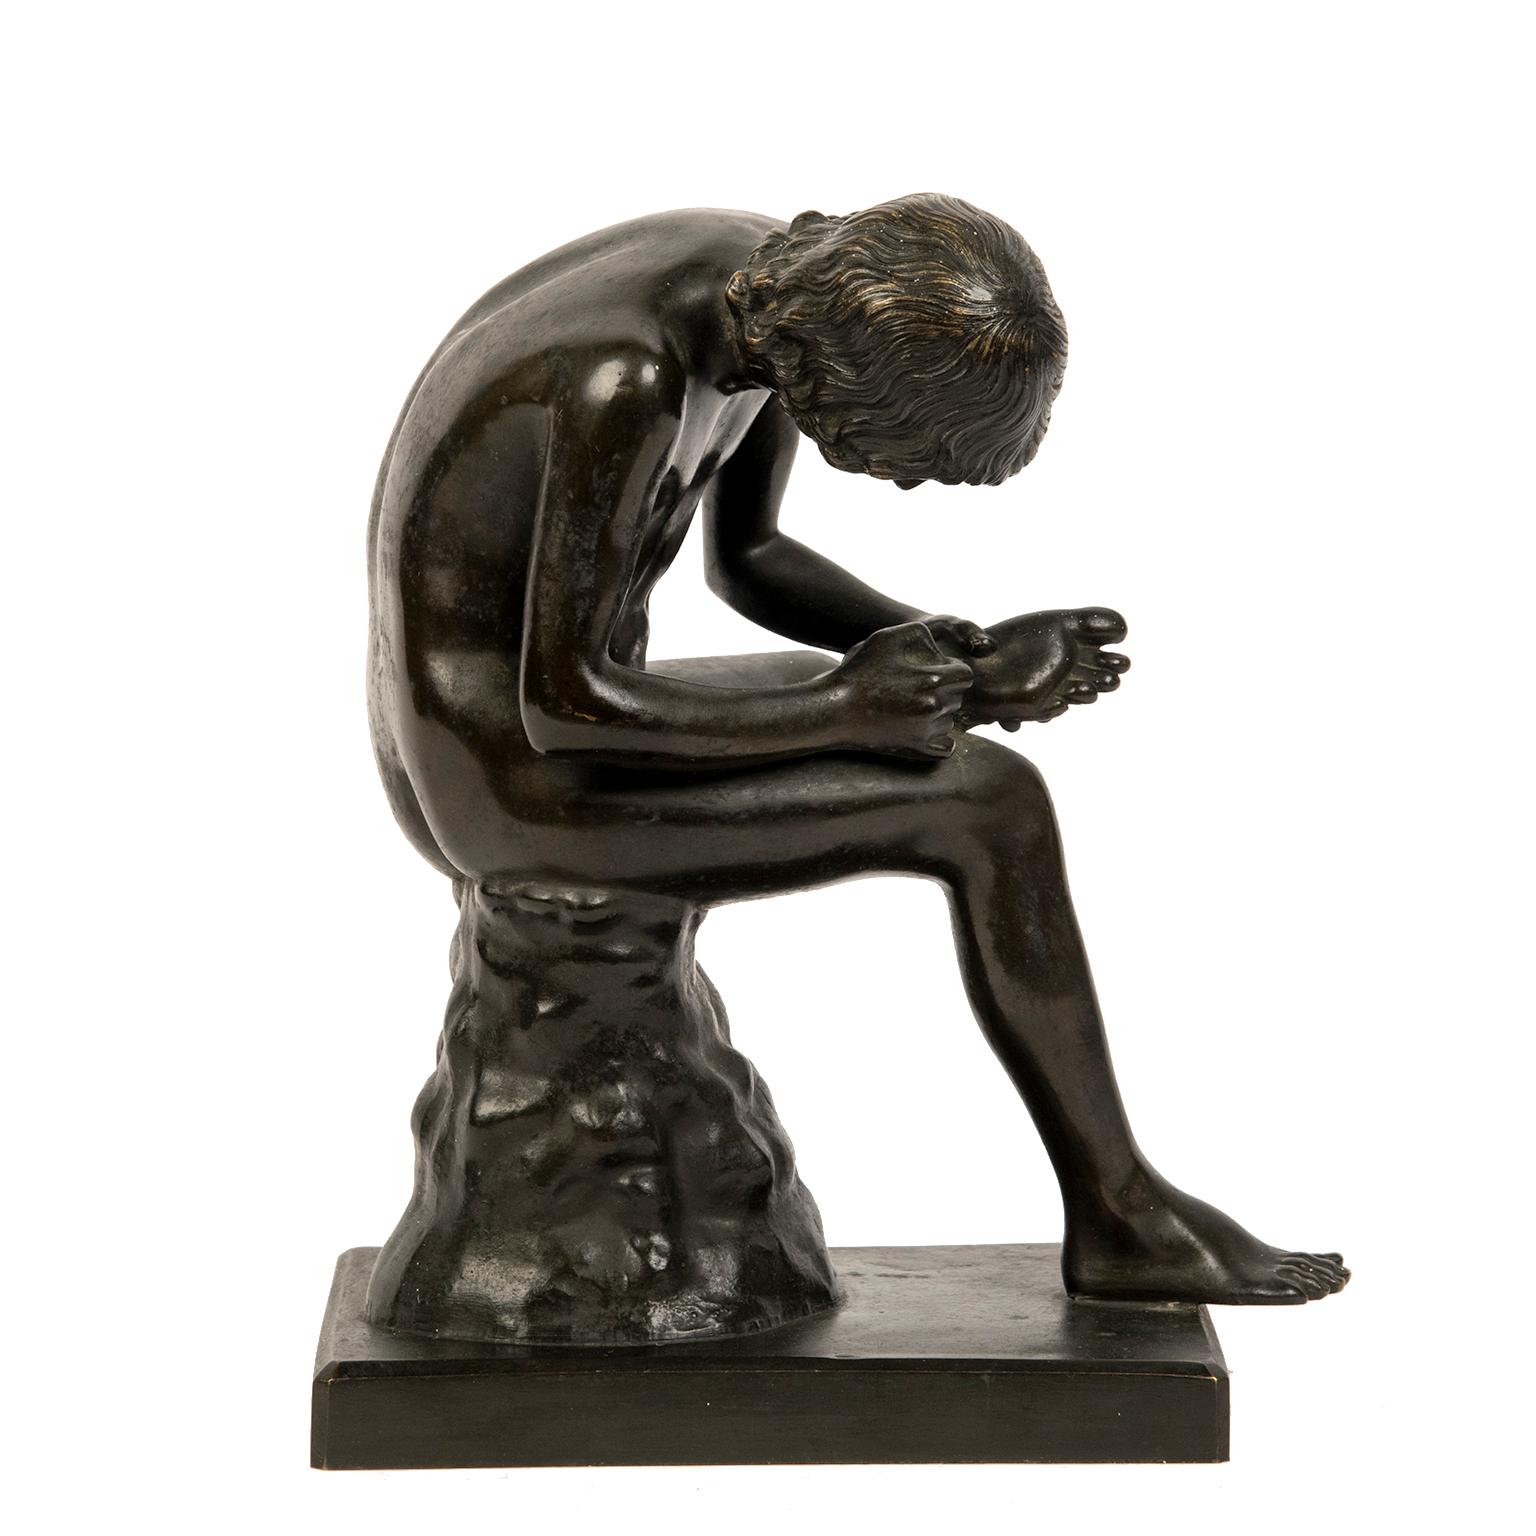 Italian Grand Tour “Boy with Thorn” or Spinario Bronze Sculpture